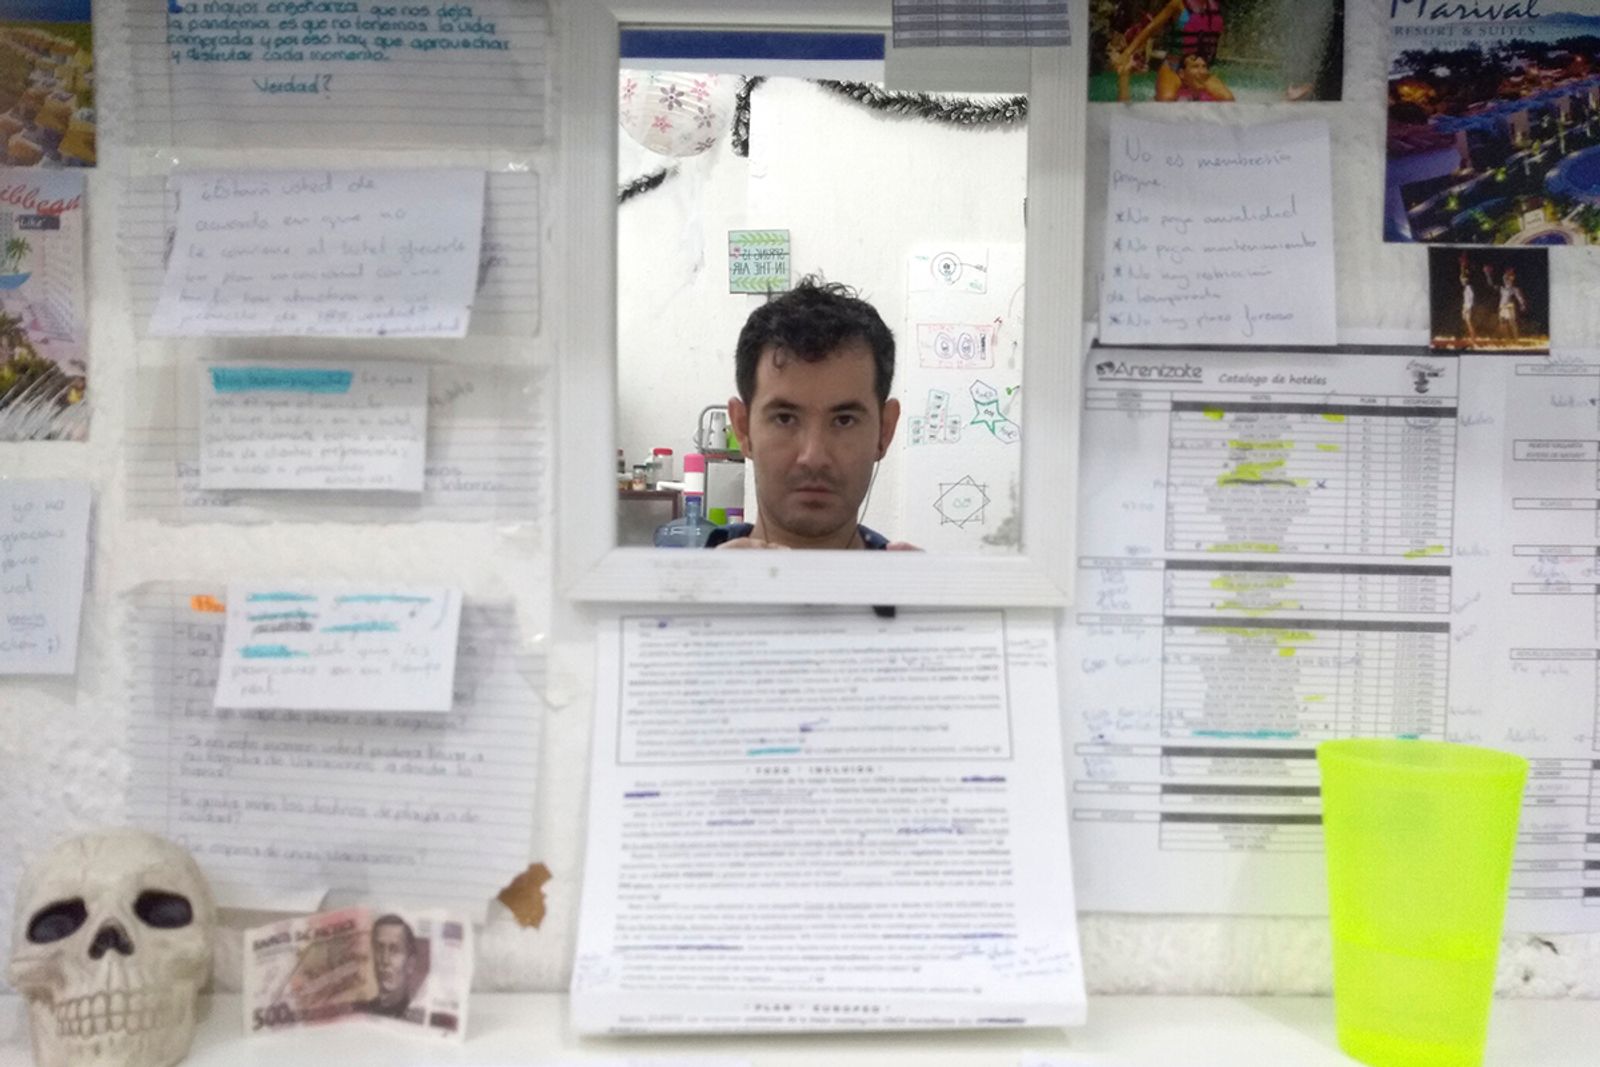 © Arturo Velázquez Hernández - Self-portrait at my first job in Cancun; an illegal call center. Cancun, Quintana Roo, Mexico, 2020.